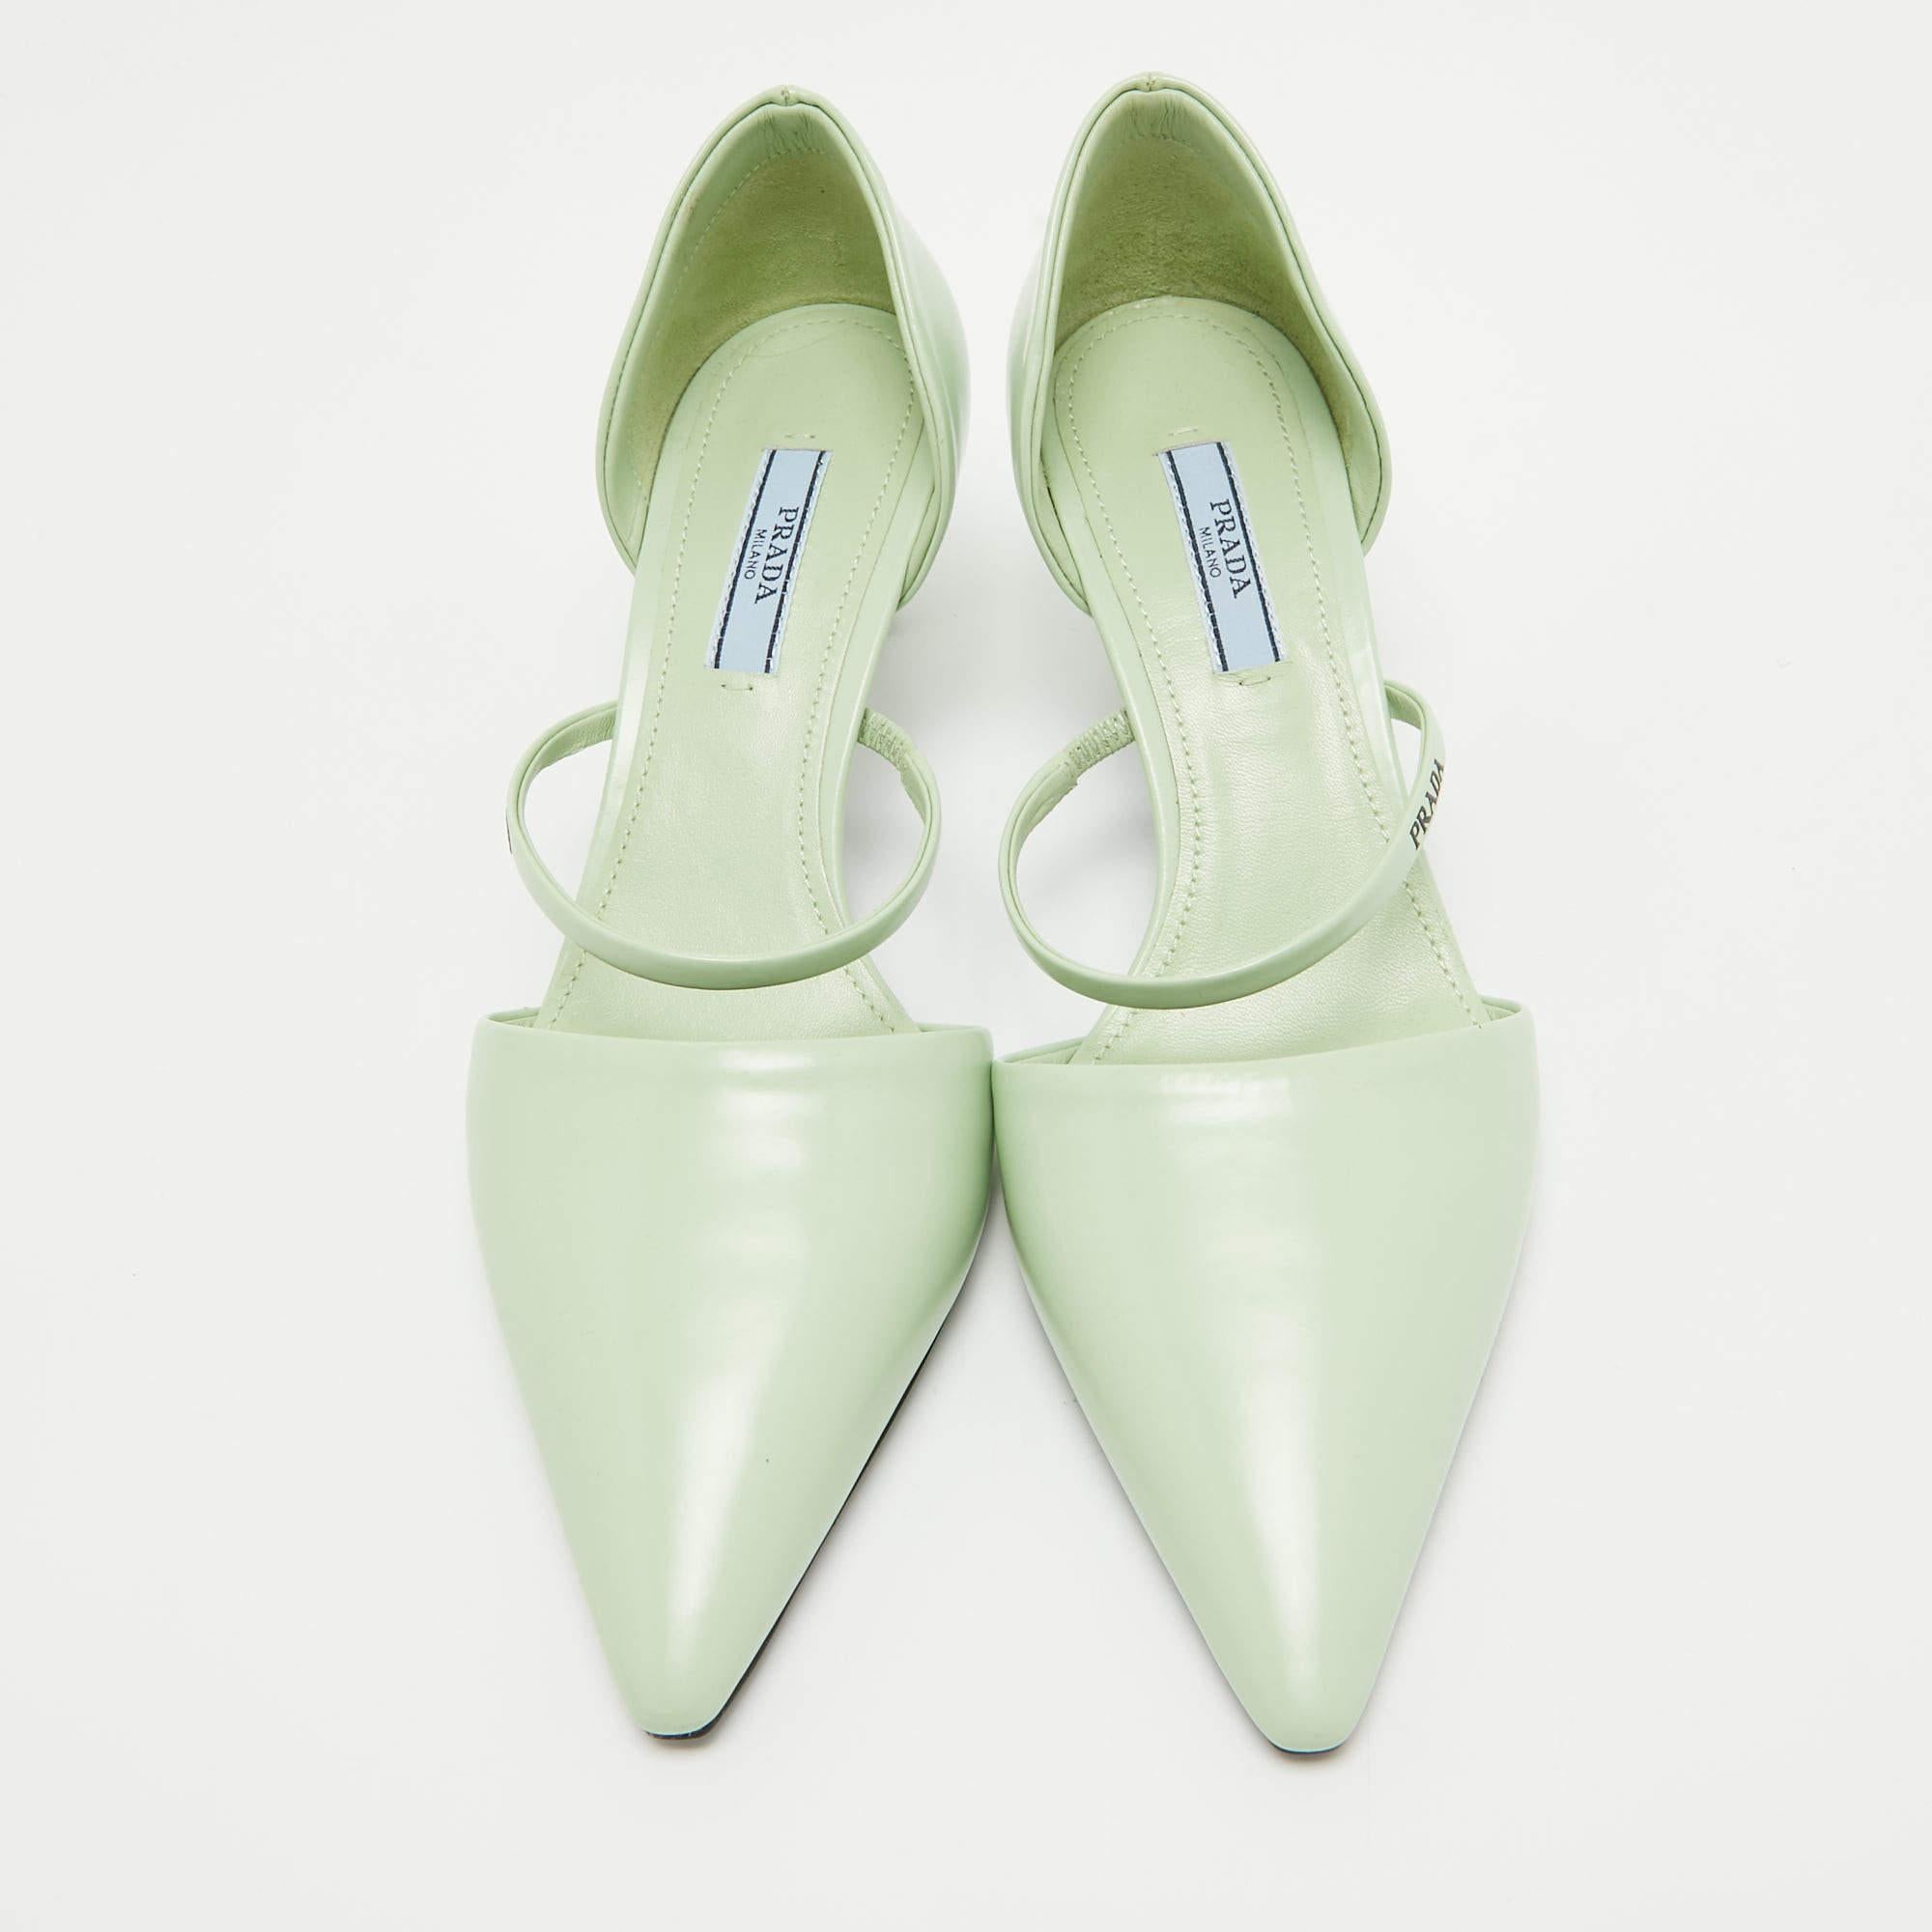 Women's Prada Mint Green Leather Mary Jane D'orsay Pumps Size 37